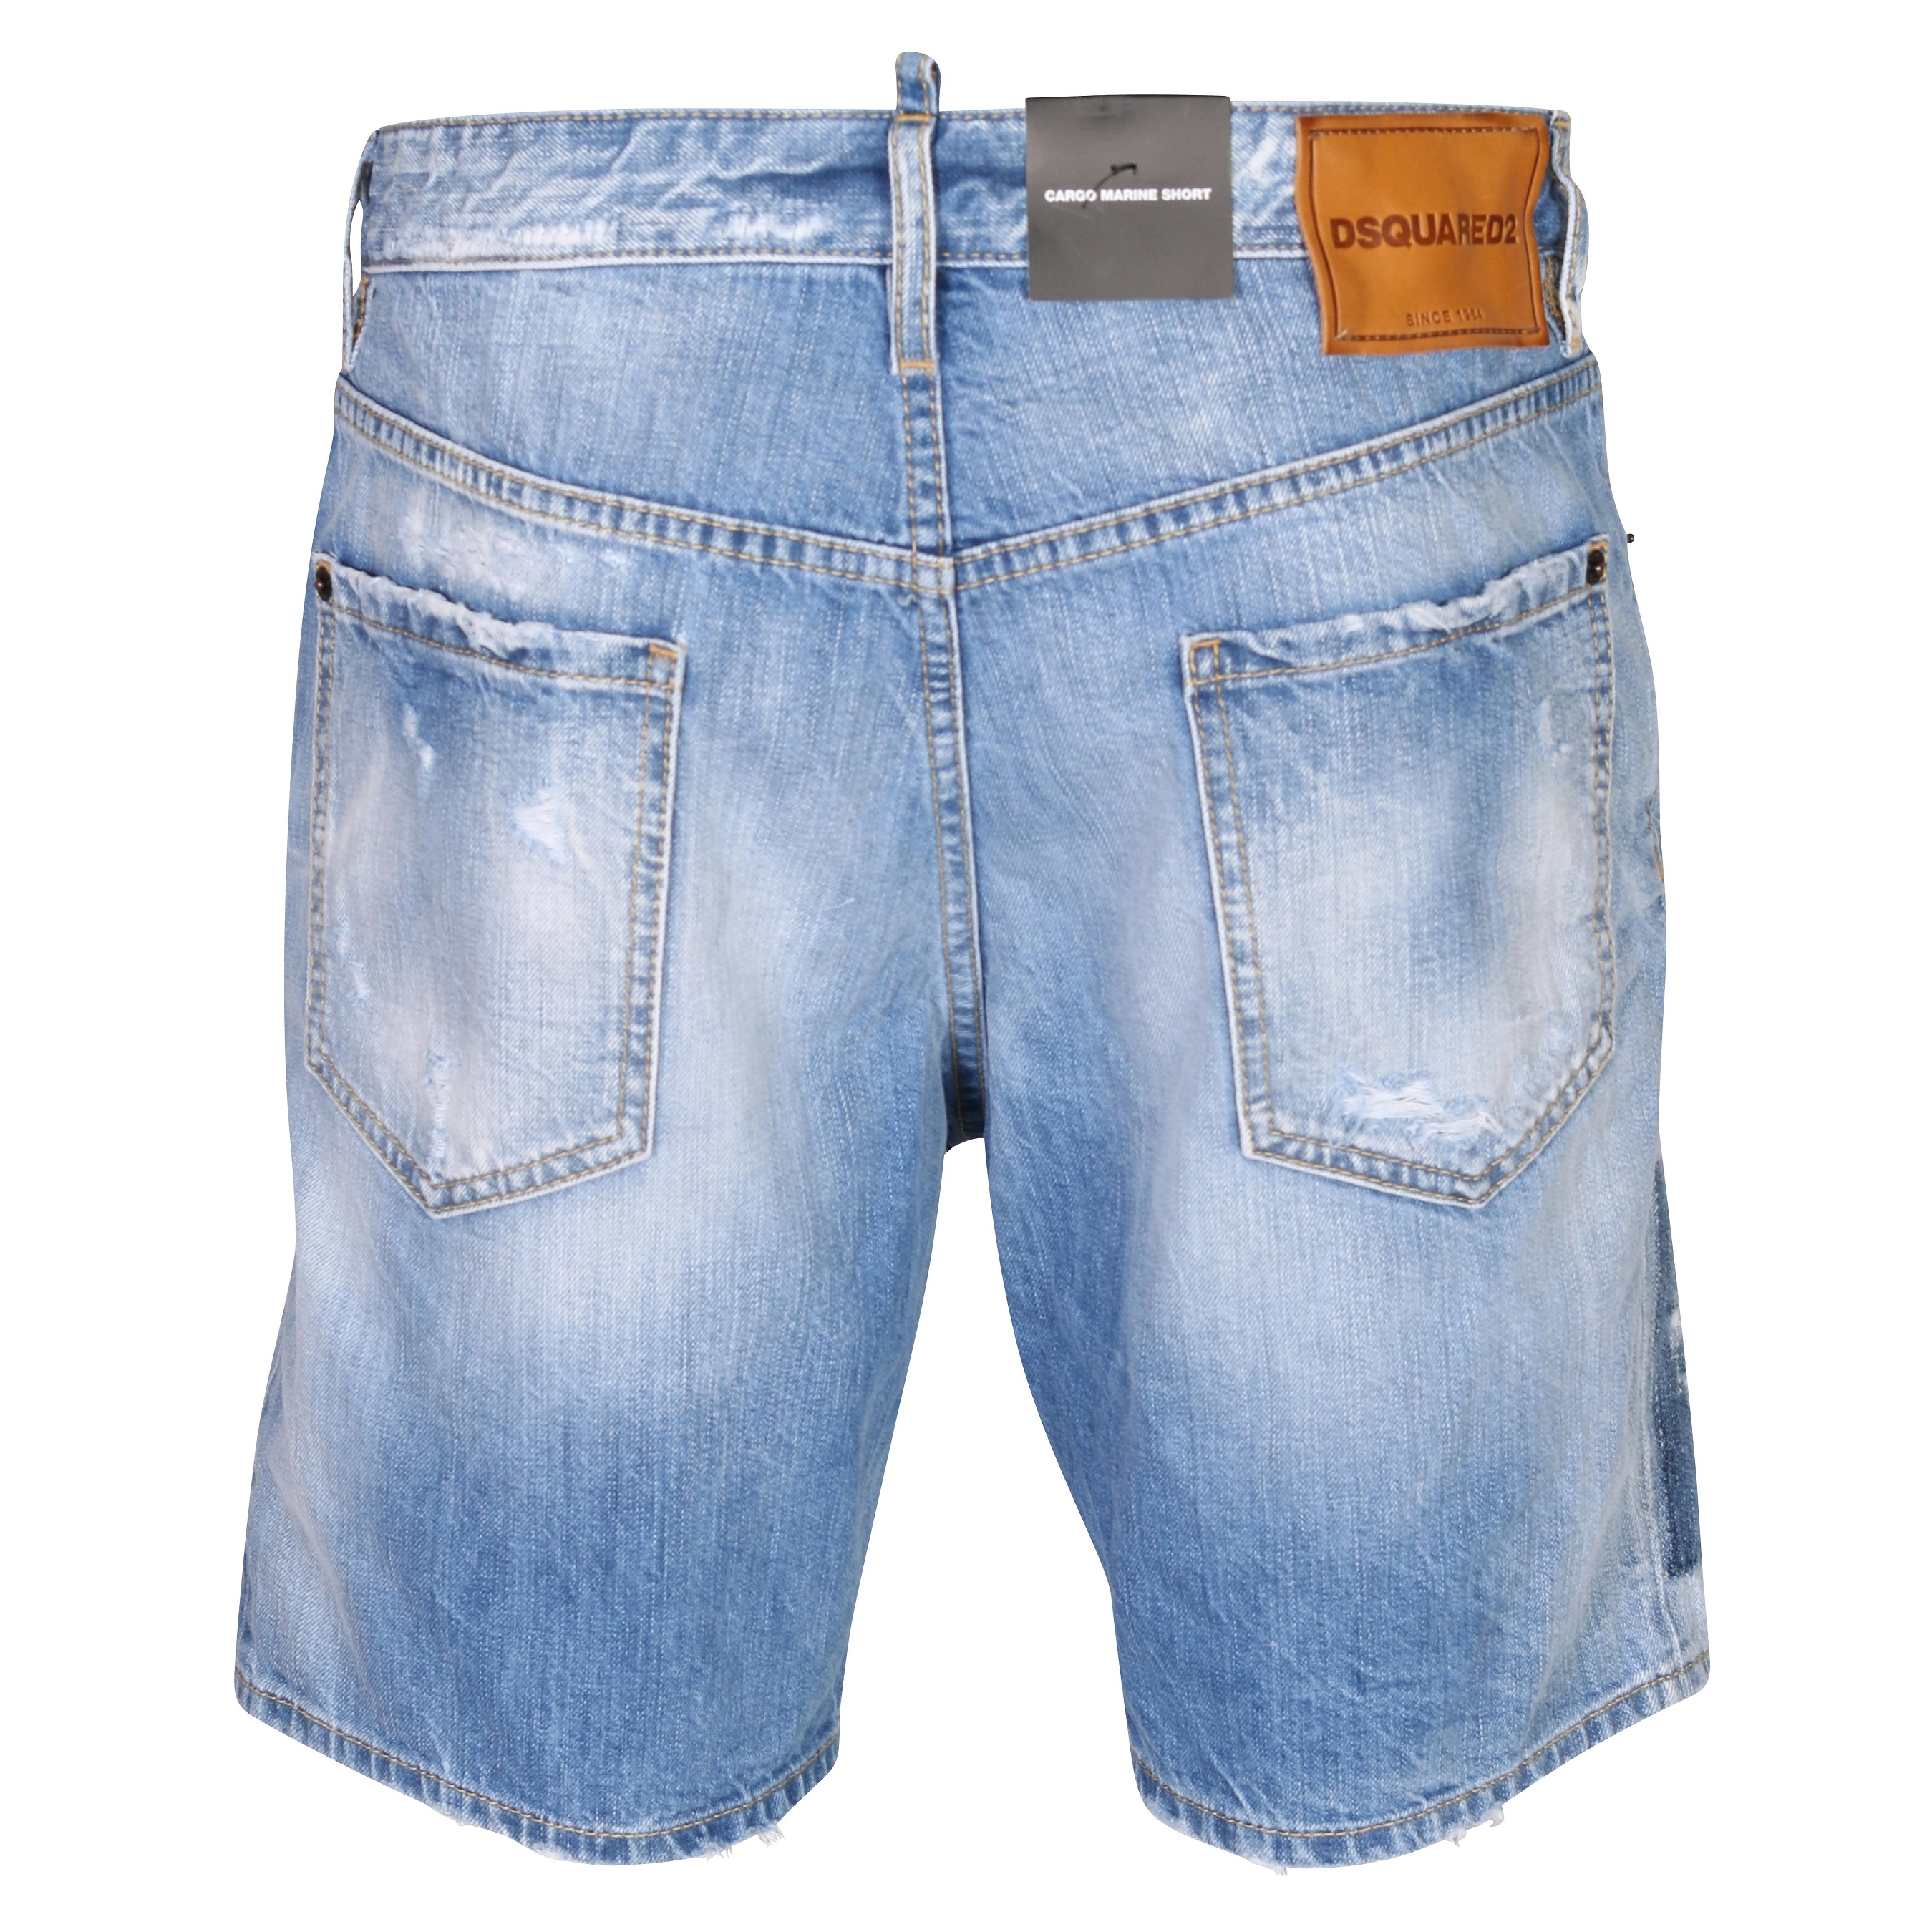 Dsquared Marine Jeans Shorts in Light Blue 46